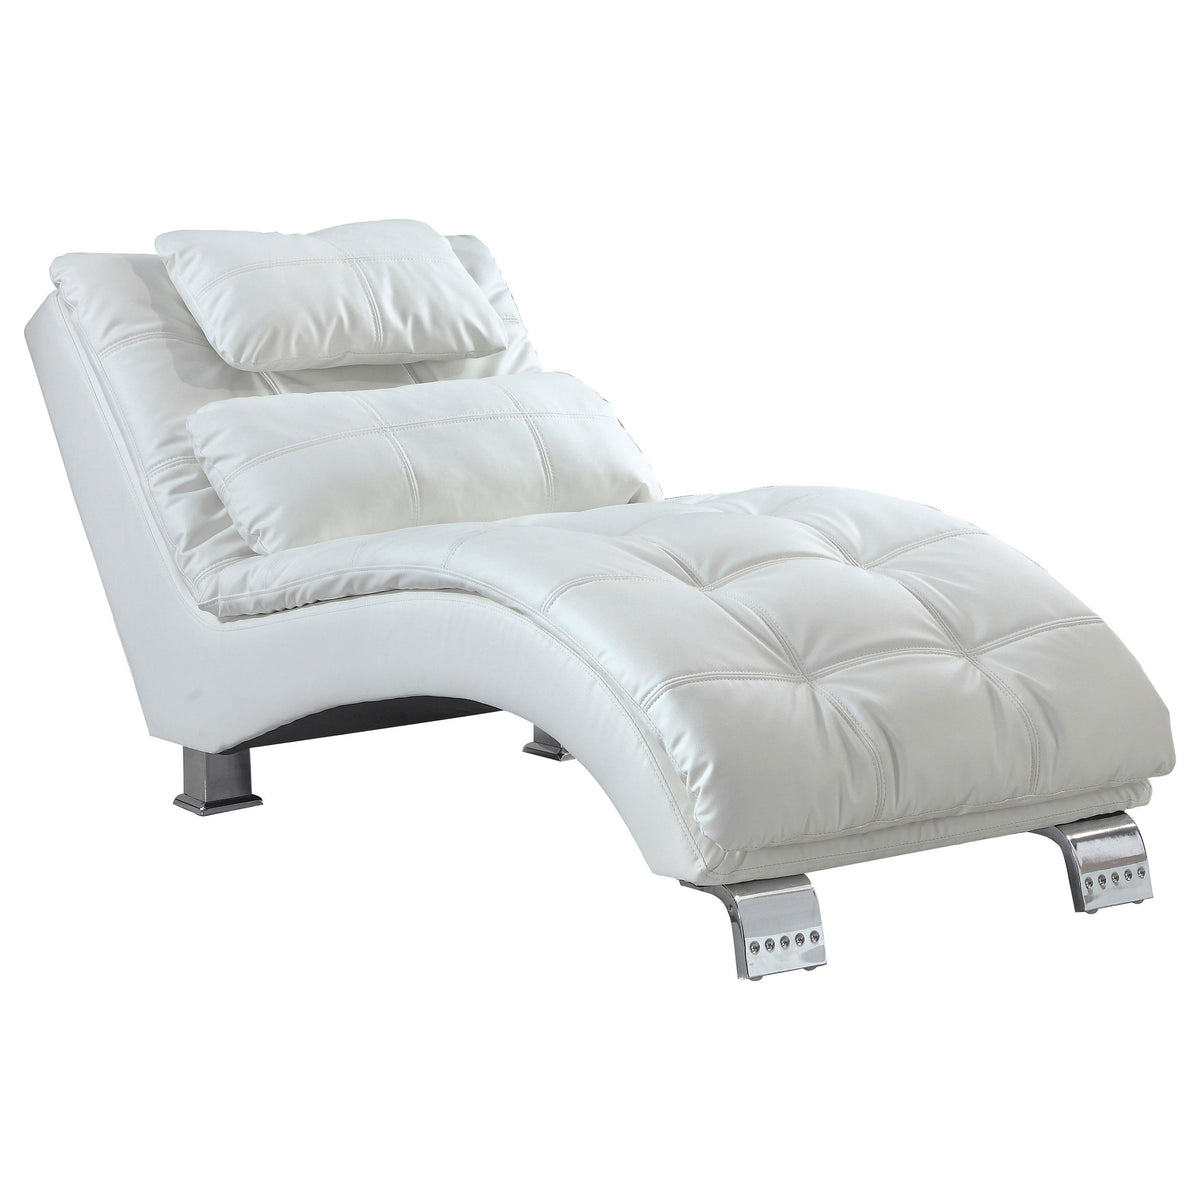 Dilleston Upholstered Chaise White  Las Vegas Furniture Stores